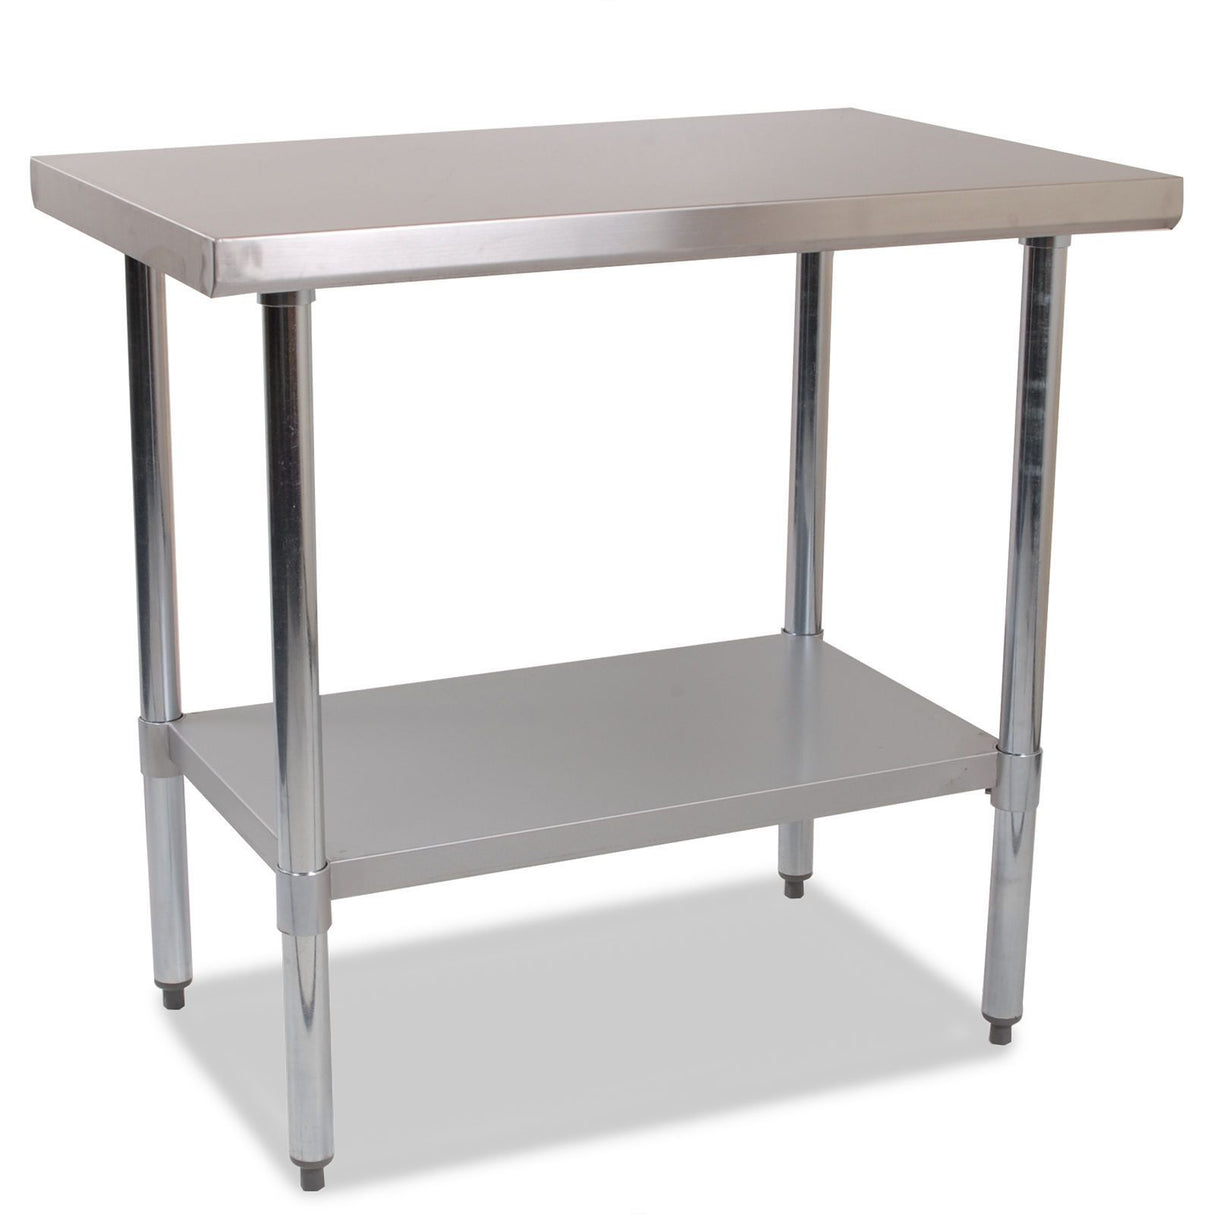 Premium Stainless Steel Centre Table - 1200mm